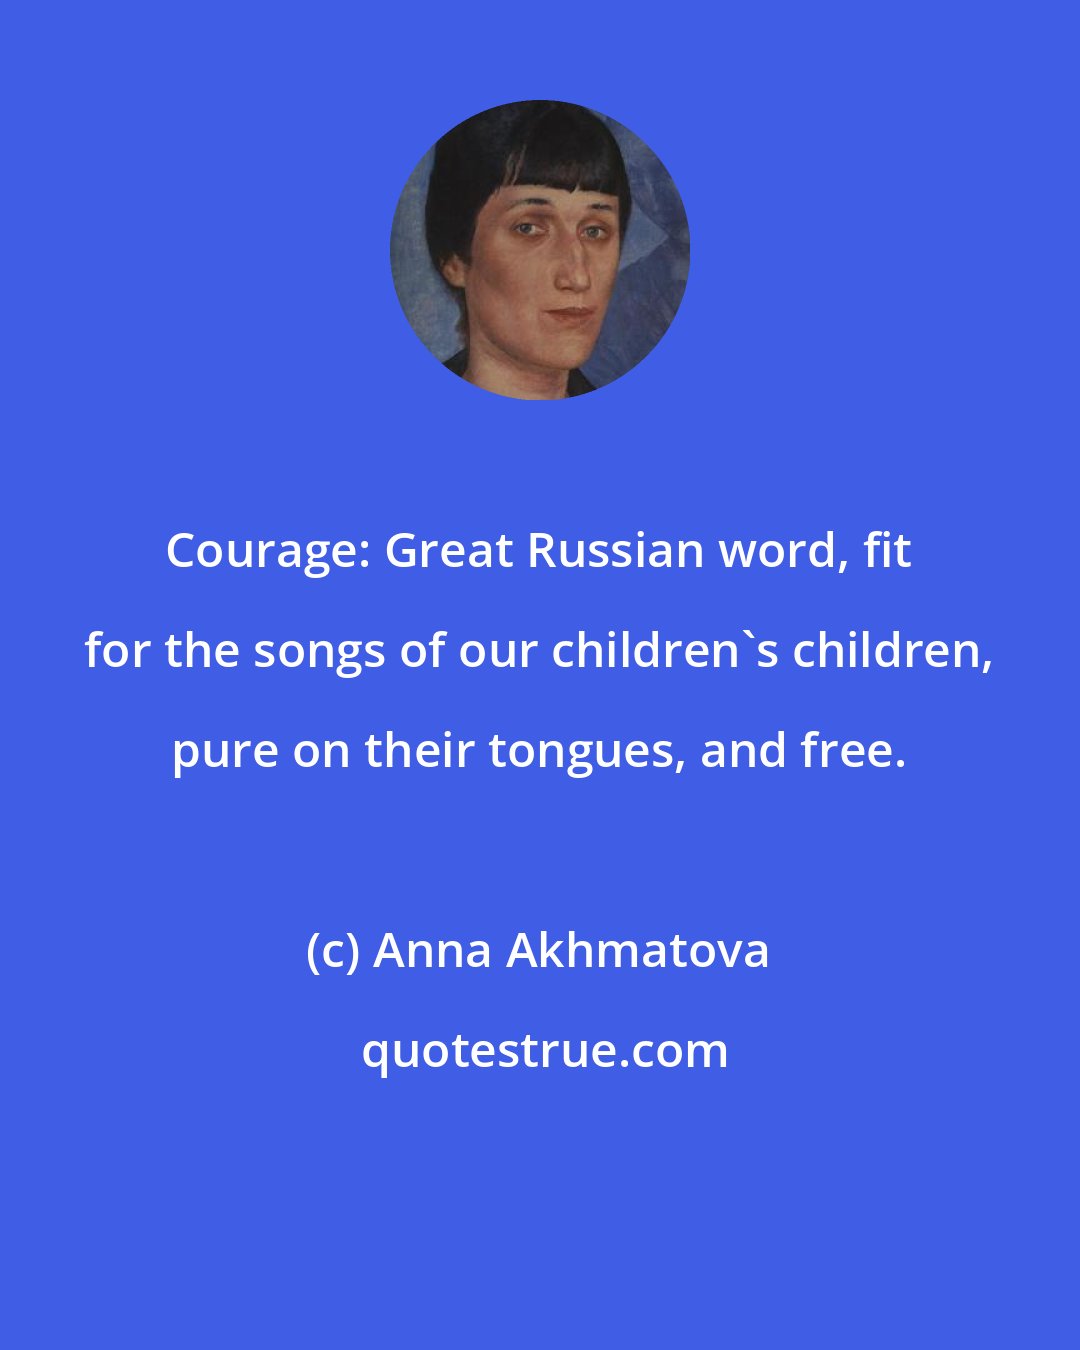 Anna Akhmatova: Courage: Great Russian word, fit for the songs of our children's children, pure on their tongues, and free.